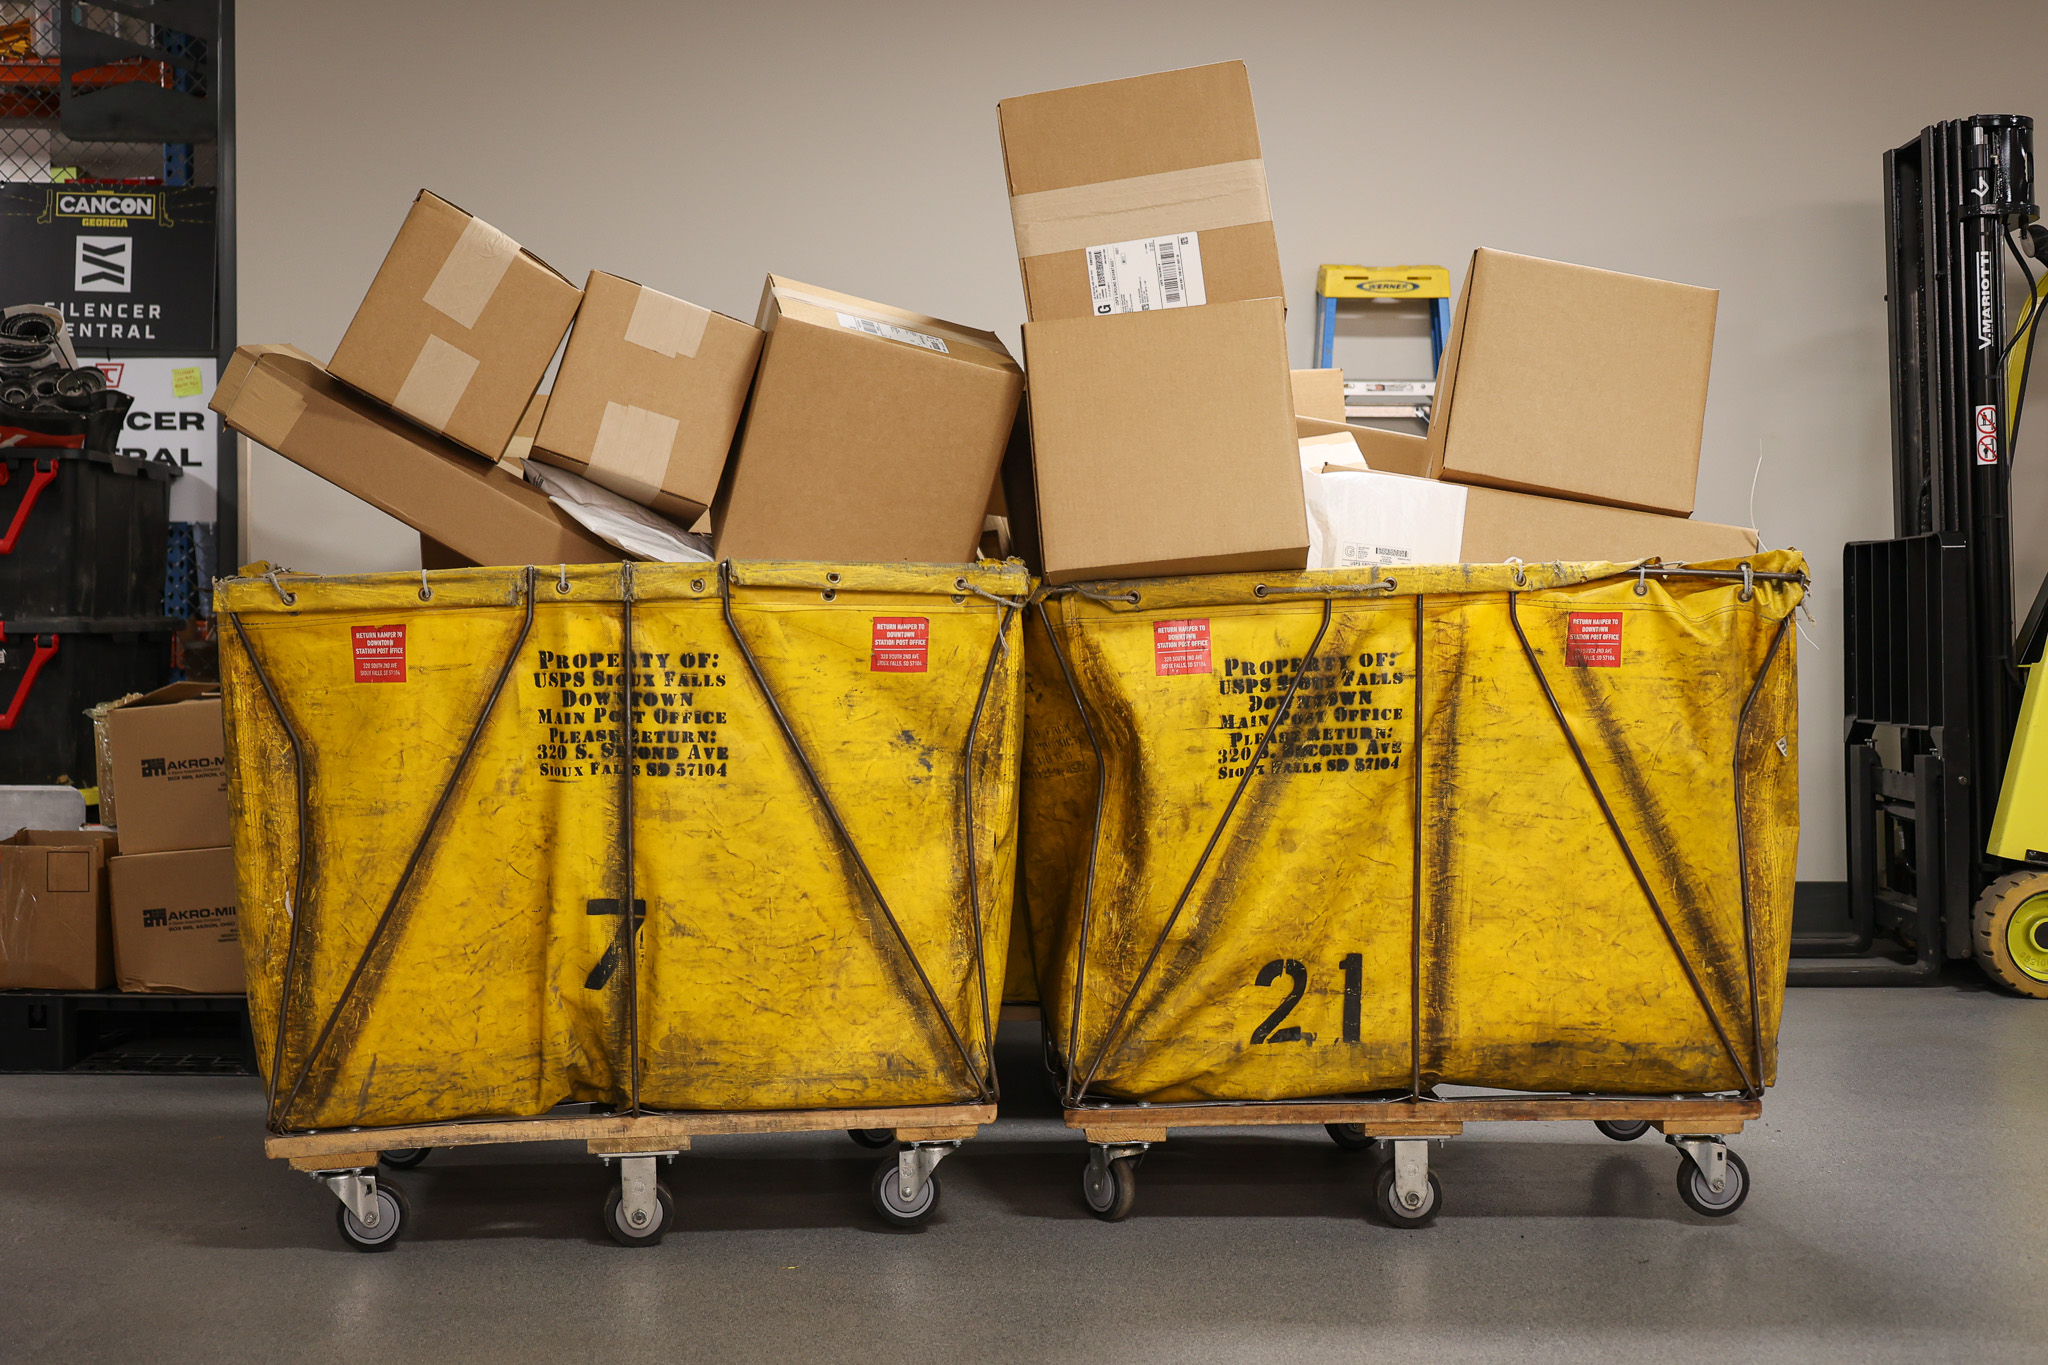 Boxes in yellow mail hoppers.